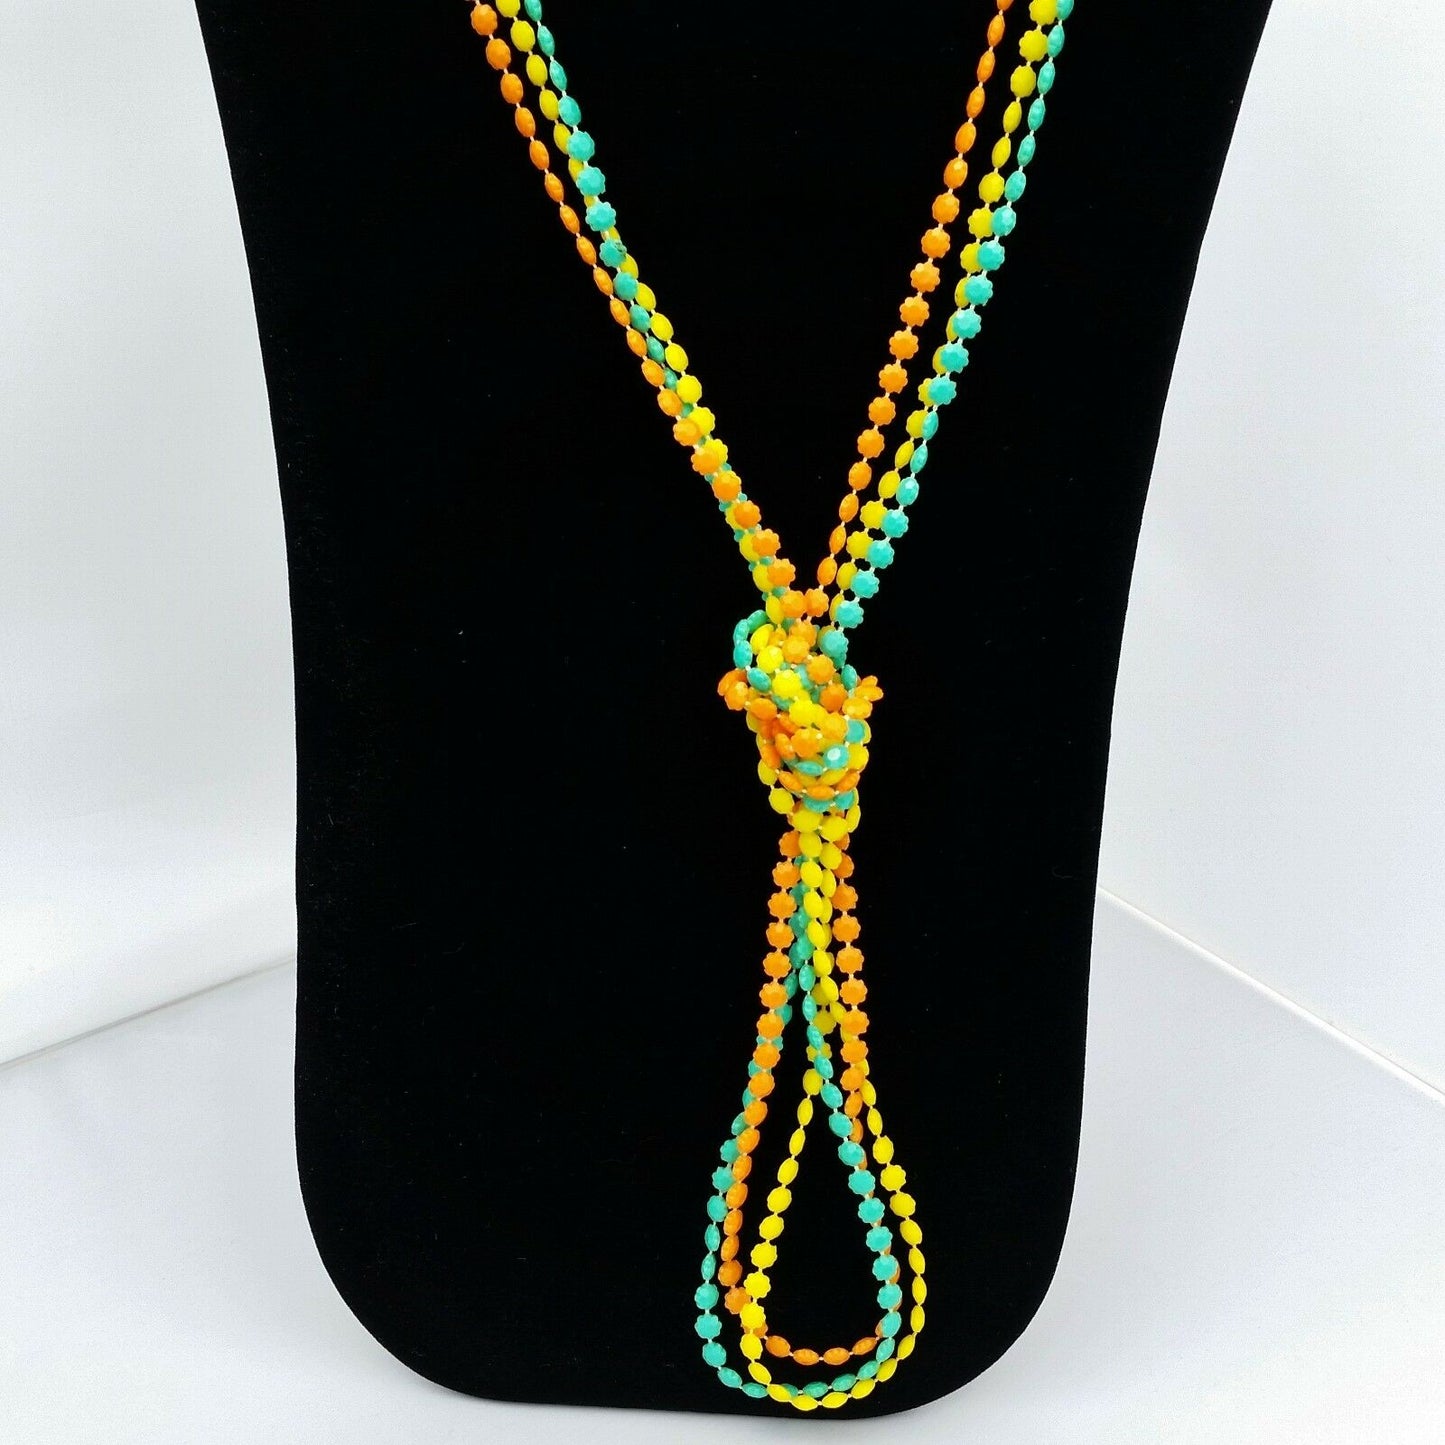 Vintage Flower Bead Necklace Multi Strand Extra Long Plastic Teal Yellow Orange Jewelry - At Grandma's Table